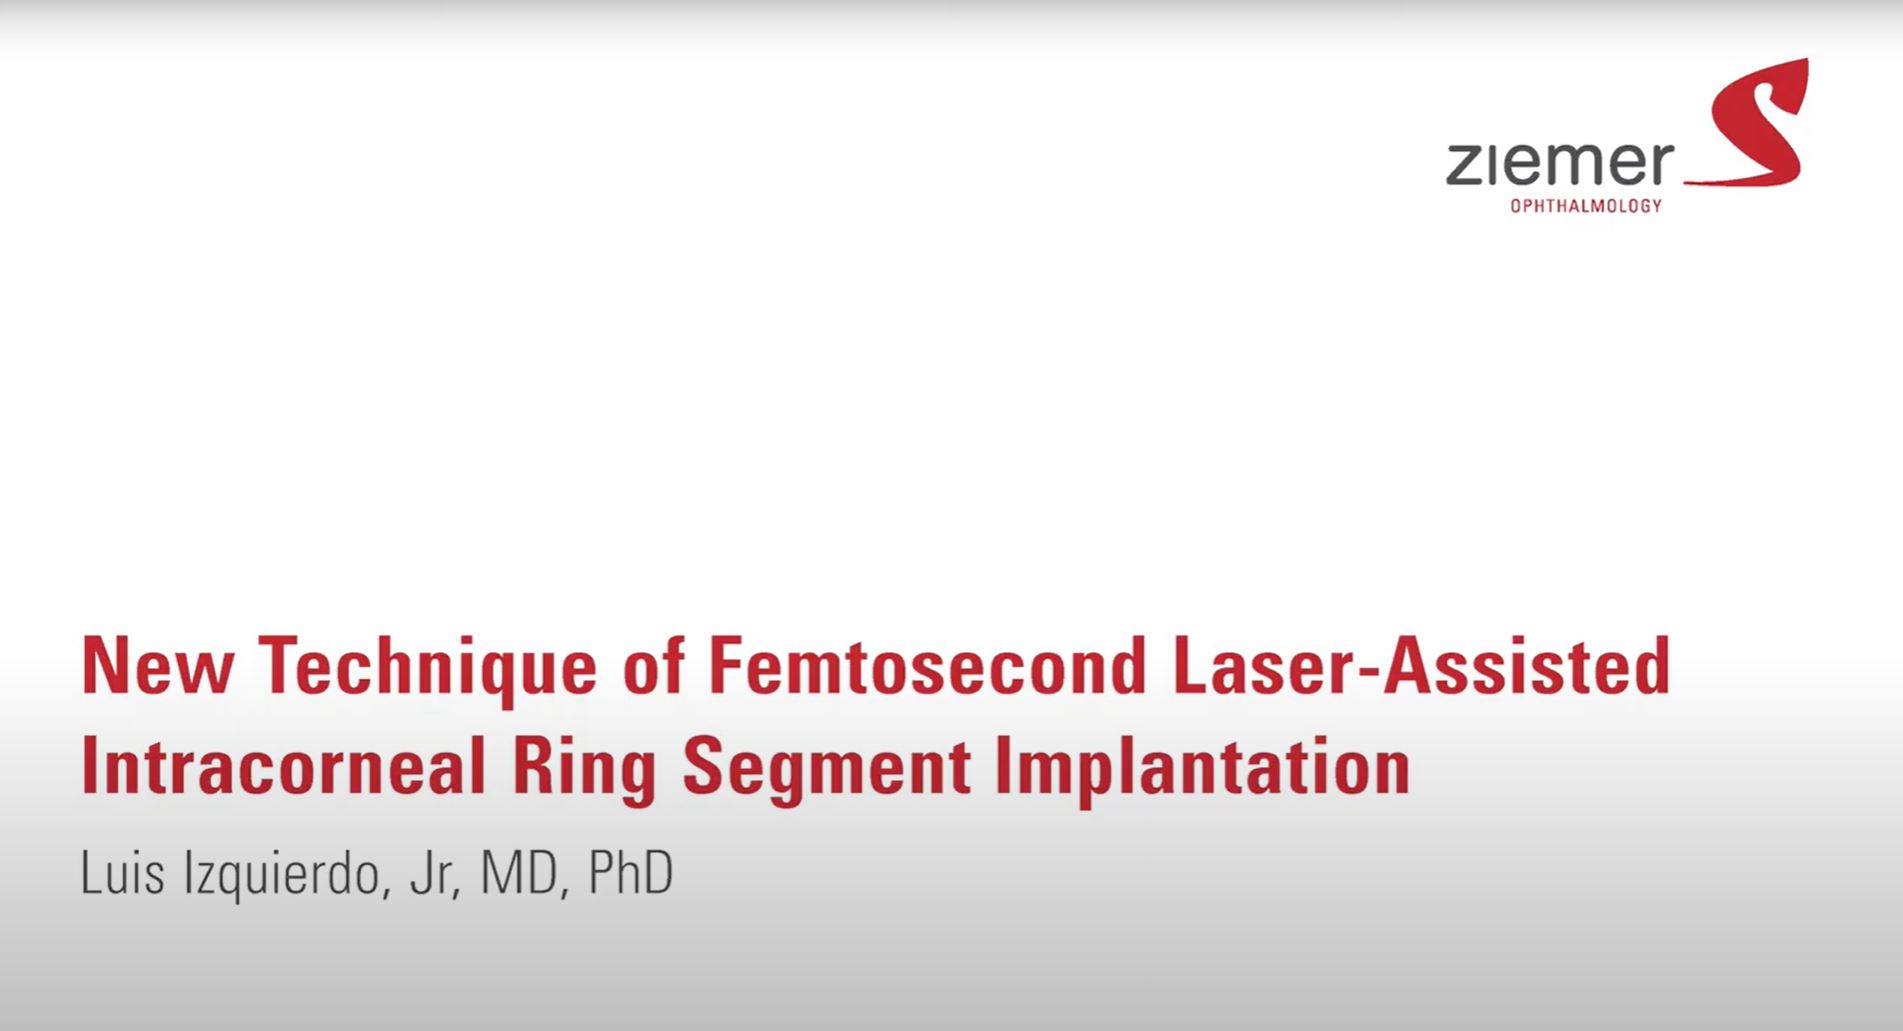 Luis Izquierdo, Jr, MD, PhD explains the benefits of the new technique of femtosecond laser-assisted ring segment (ICRS) implantation that was first performed with the Ziemer FEMTO LDV Z models.